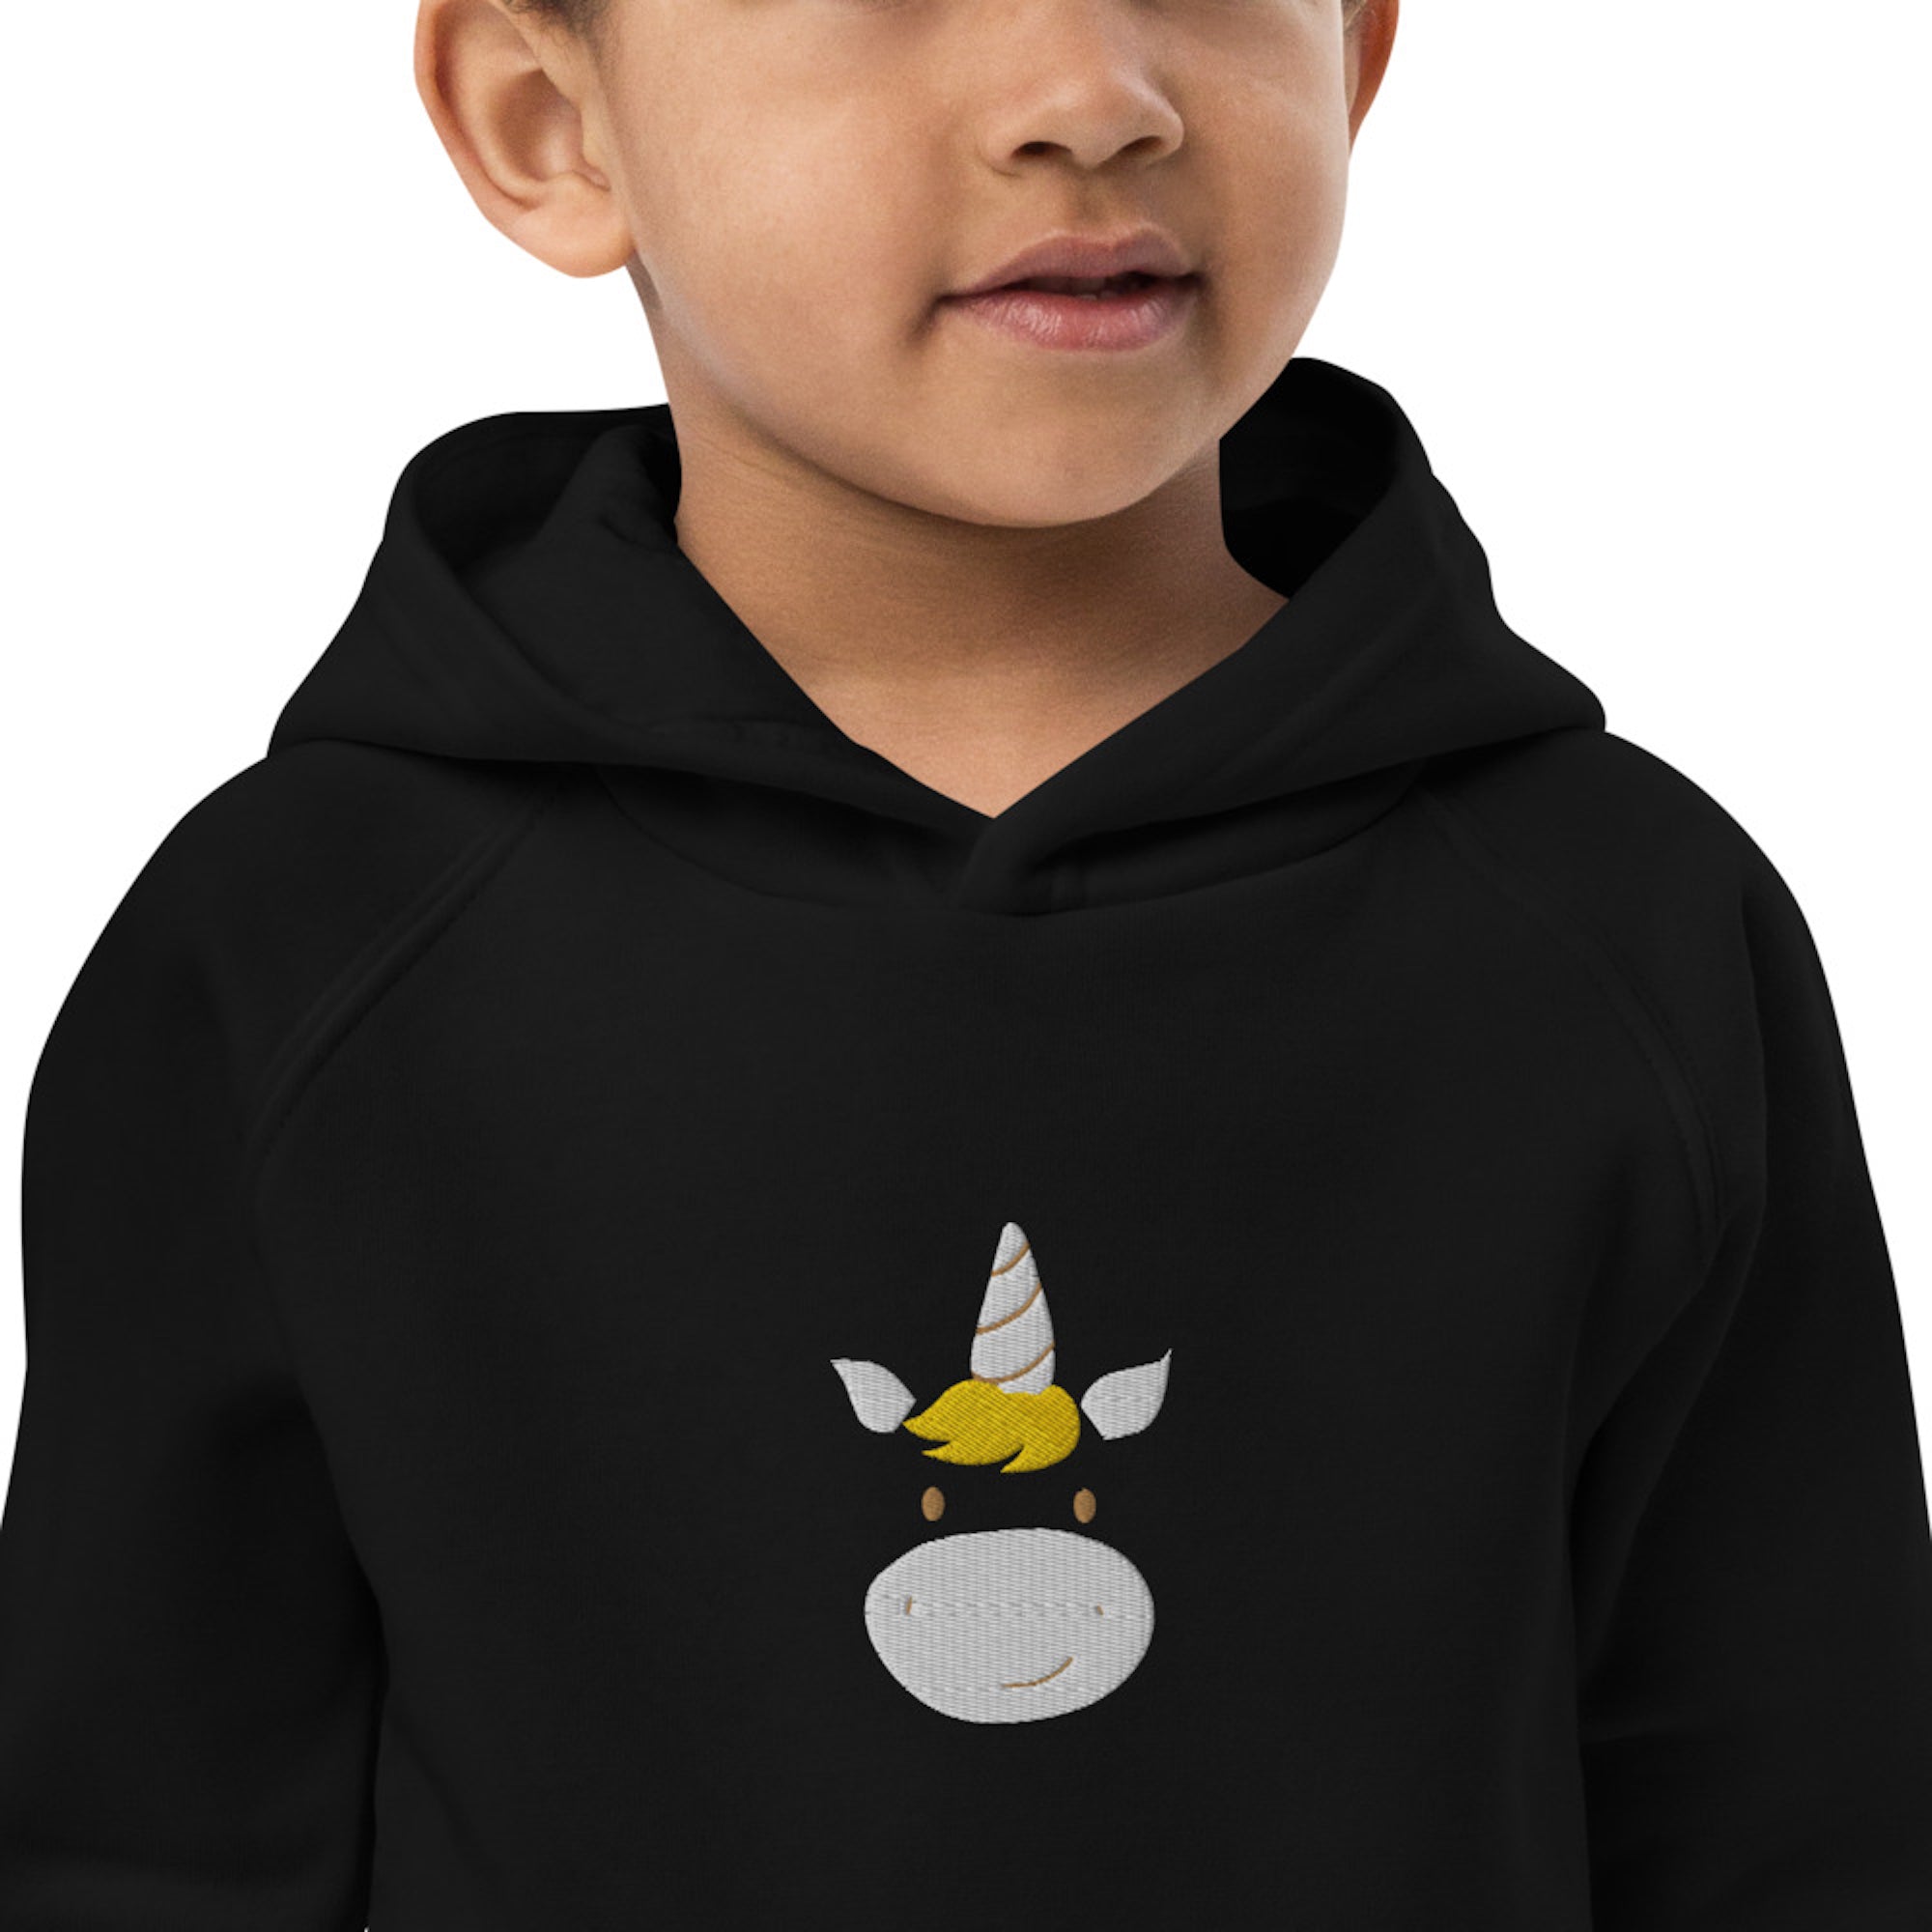 Unicorn Kids Eco Hoodie with cute animals, Organic Cotton pullover for children in black, gift idea for kids, soft hoodie for kids-0